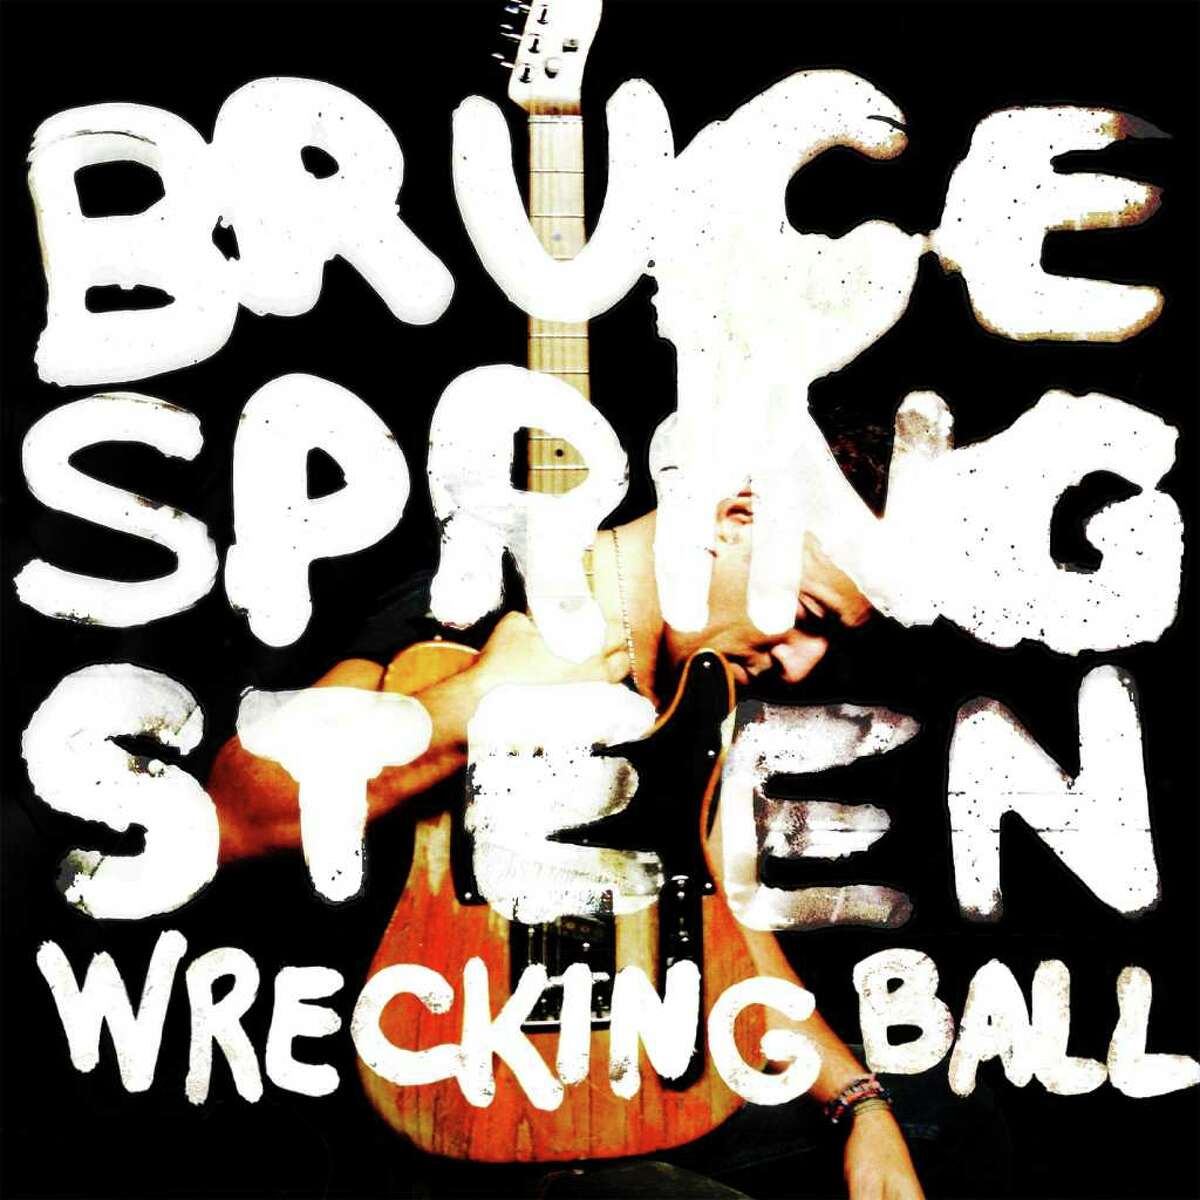 In this CD cover image released by Columbia Records, the latest release by Bruce Springsteen, "Wrecking Ball," is shown.